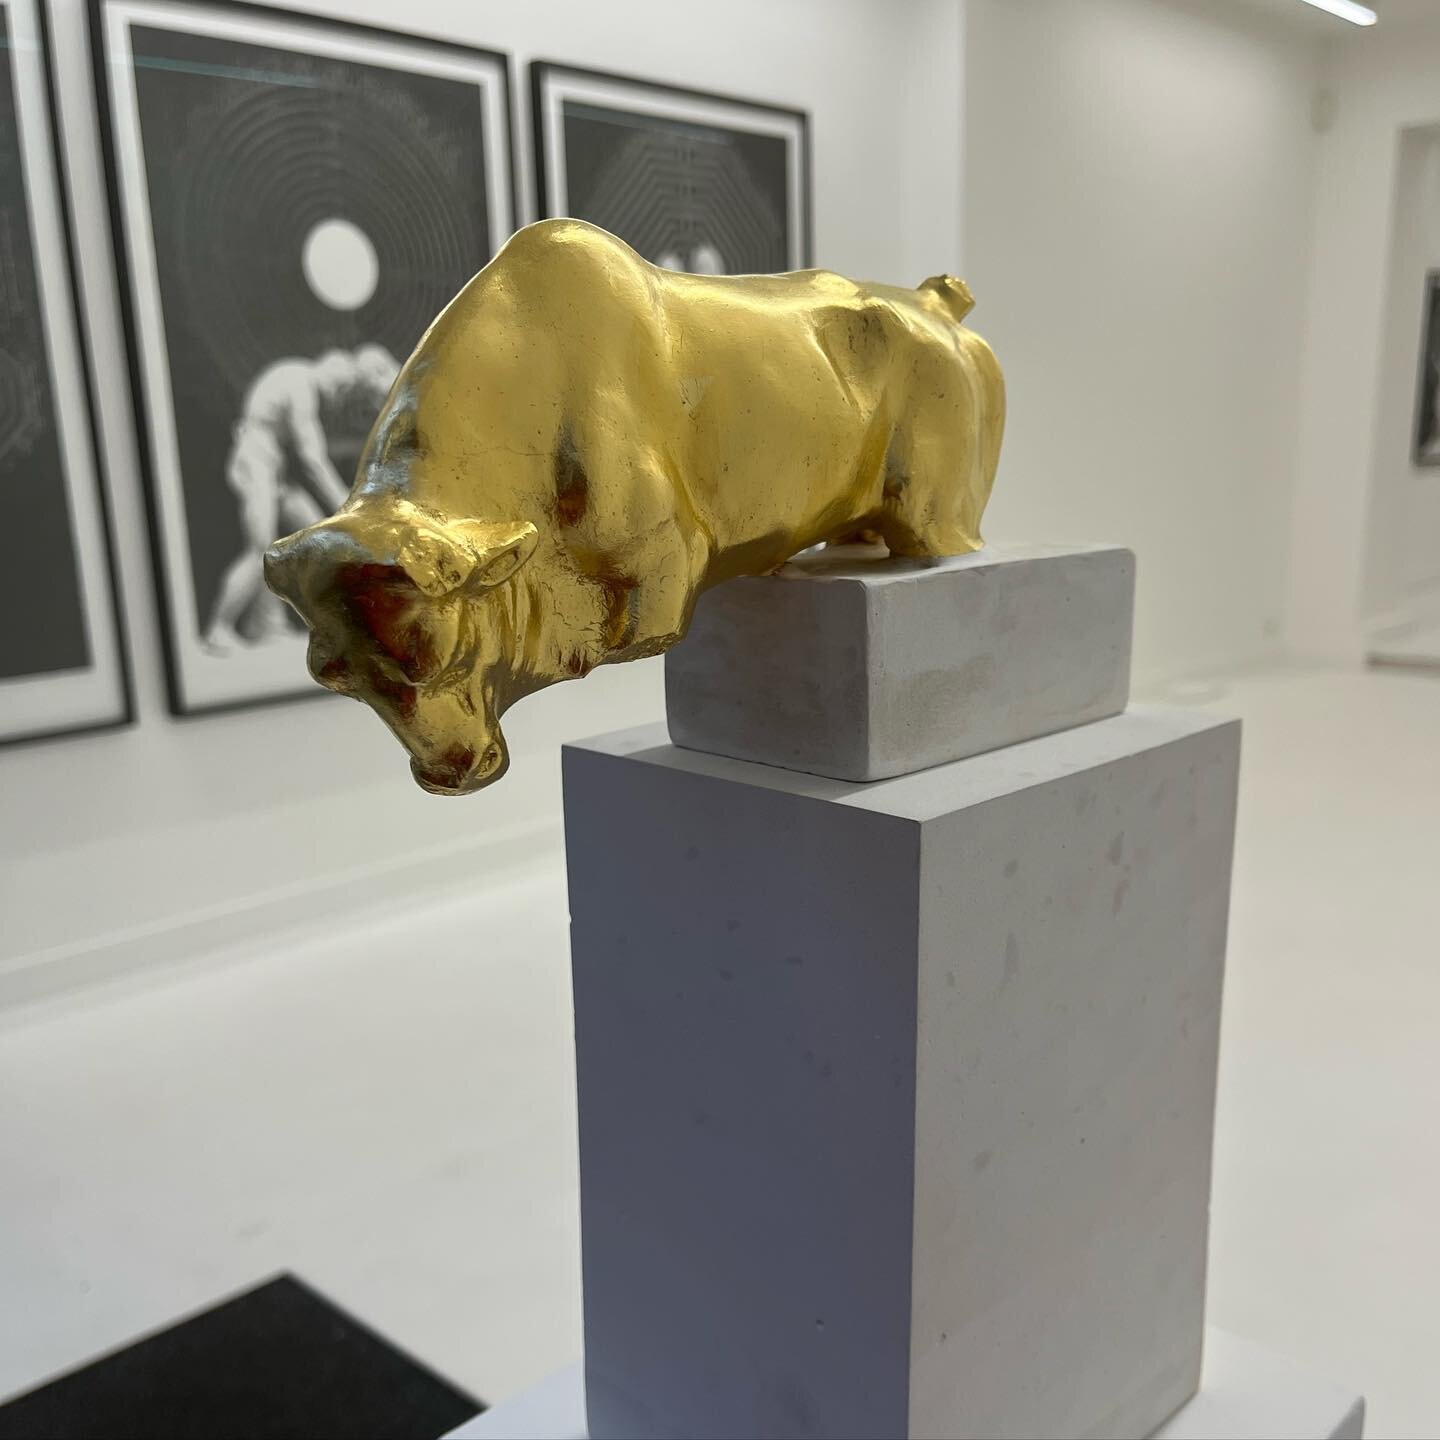 If you are in Brussels do not miss Jean Bedez exhibition @baronian.gallery #jeanbedez #maestro #sculpture #drawing #contemporaryart #curatorchoice #larapancurator #taurus♉️ vs♉️